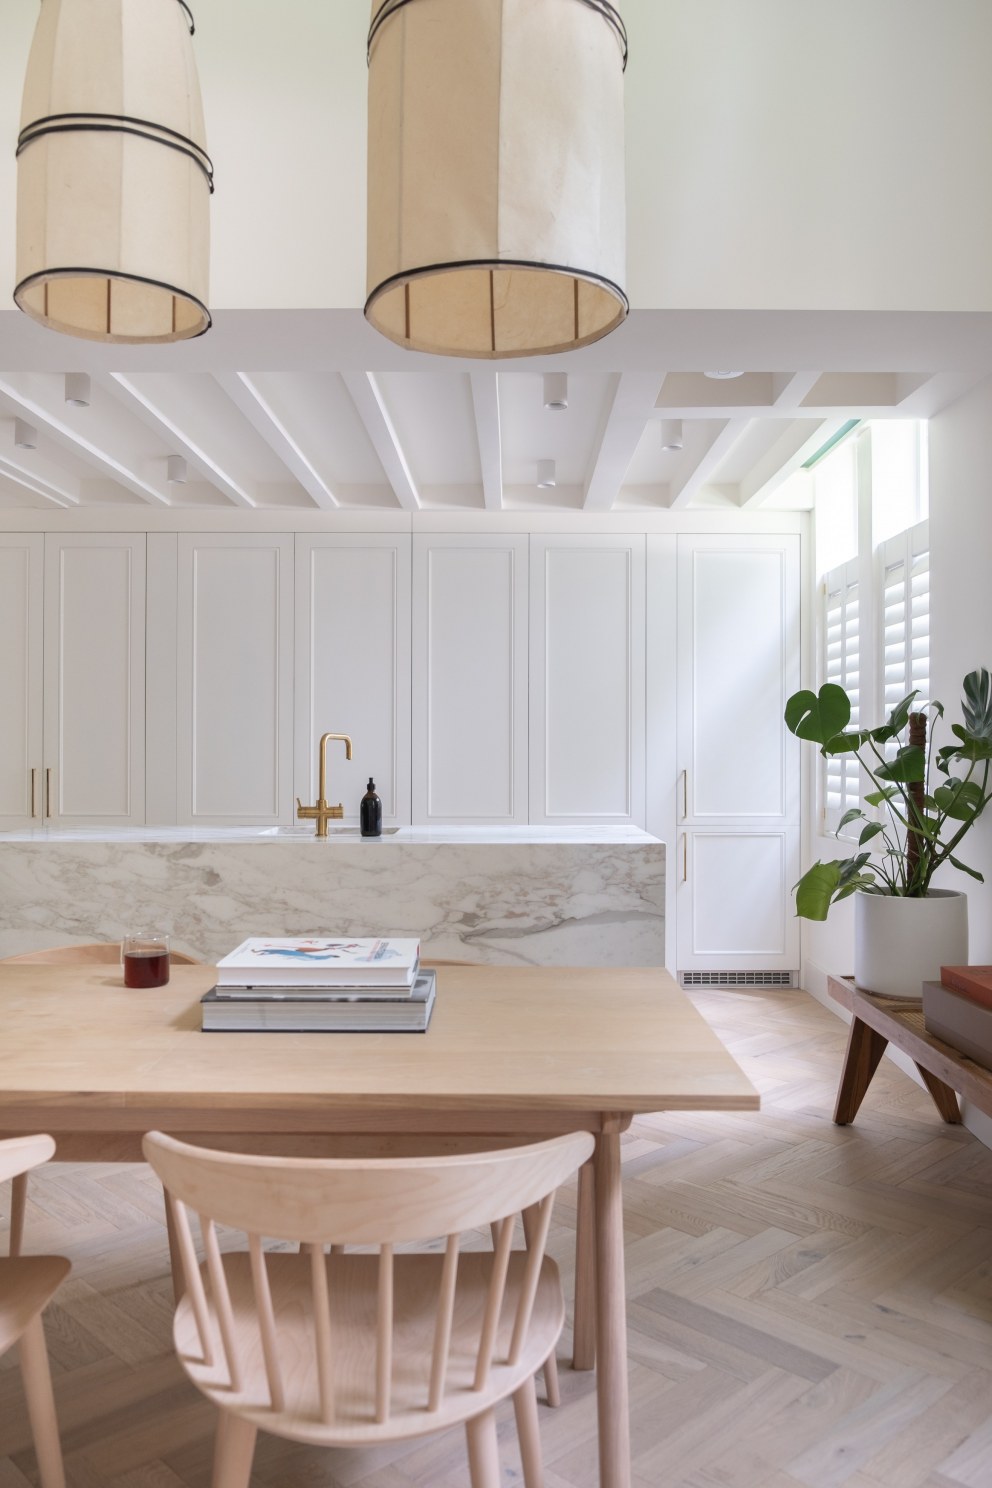 Grade II listed Hackney apartment | Kitchen-dining space | Interior Designers